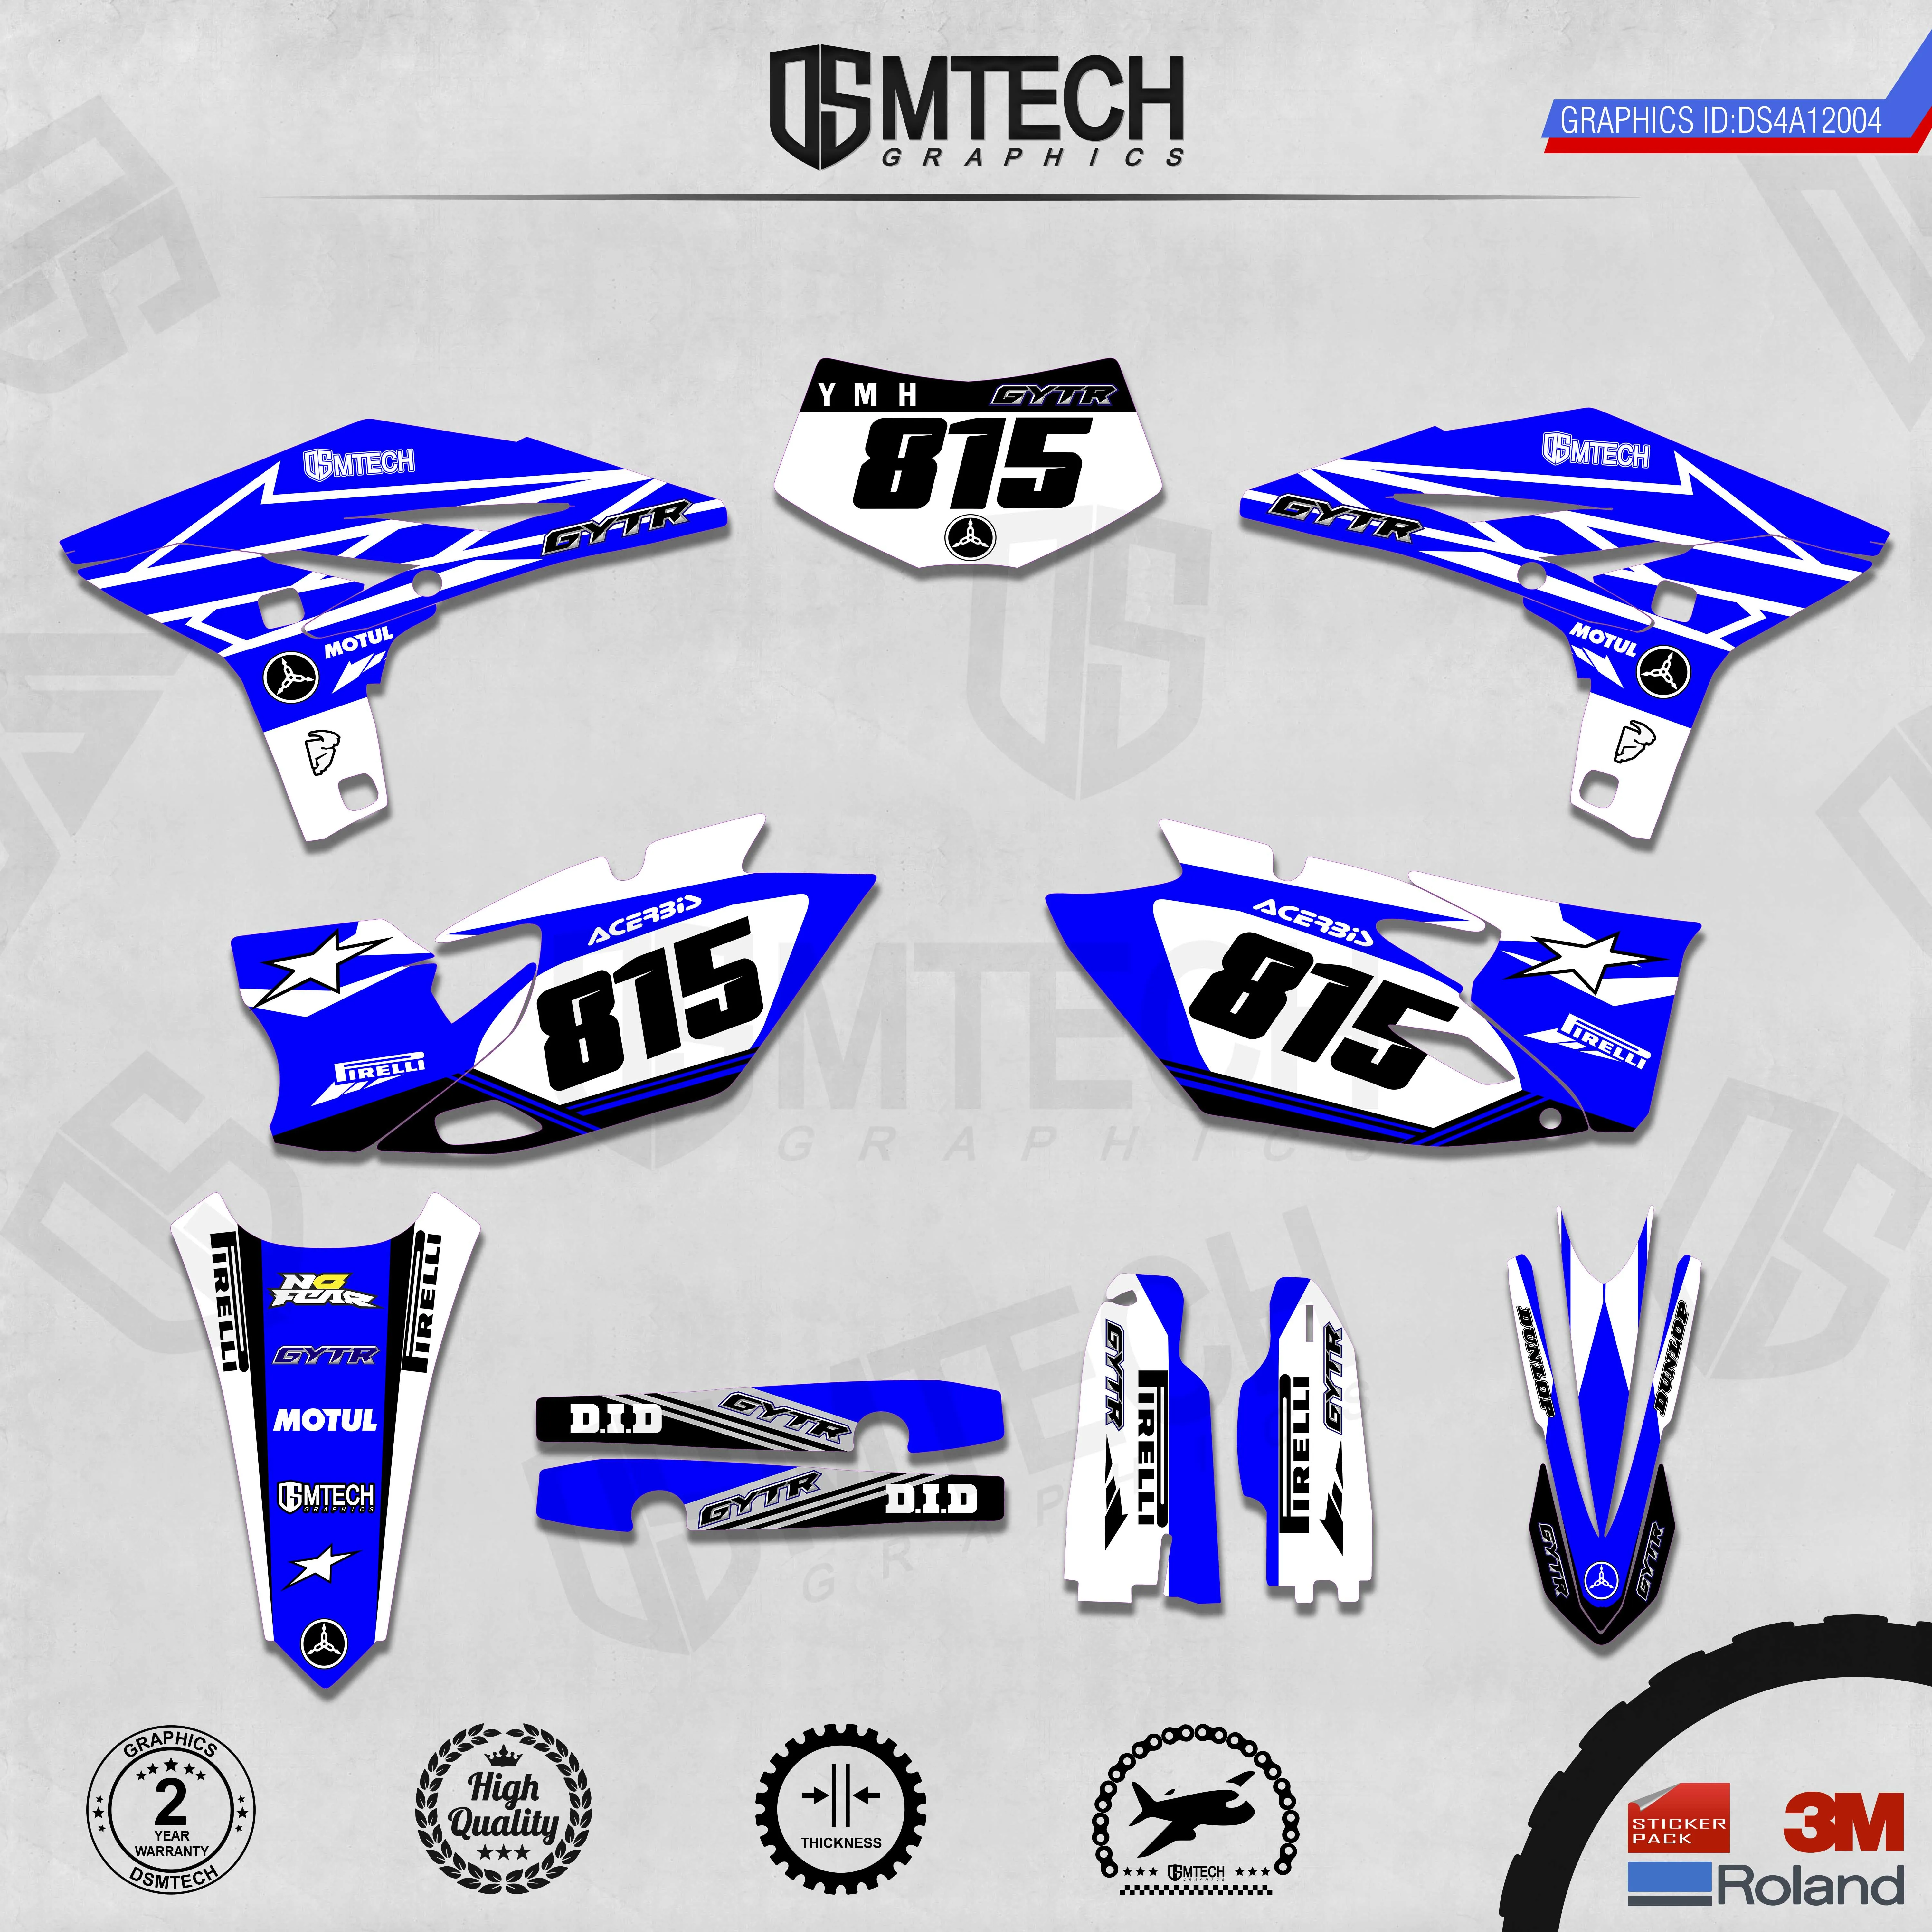 DSMTECH Customized Team Graphics Backgrounds Decals 3M Custom Stickers For  WRF450 Two Stroke 2012-2015  004